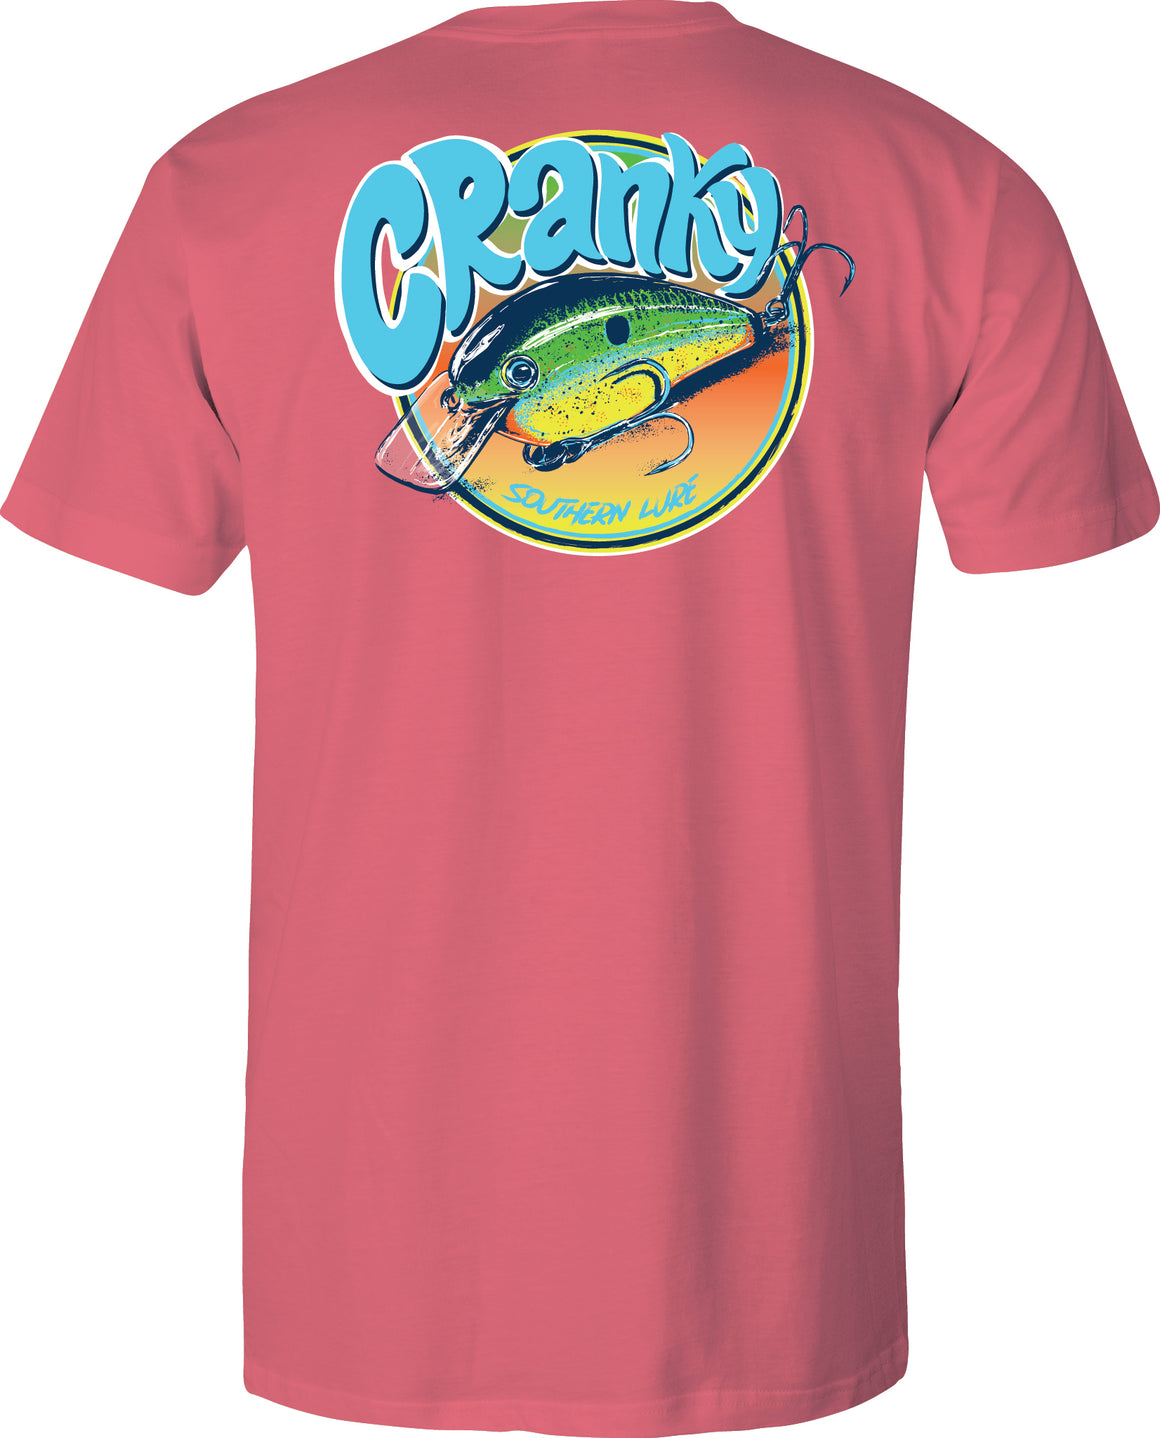 Adult Short Sleeve Tee Cranky V4 - Coral